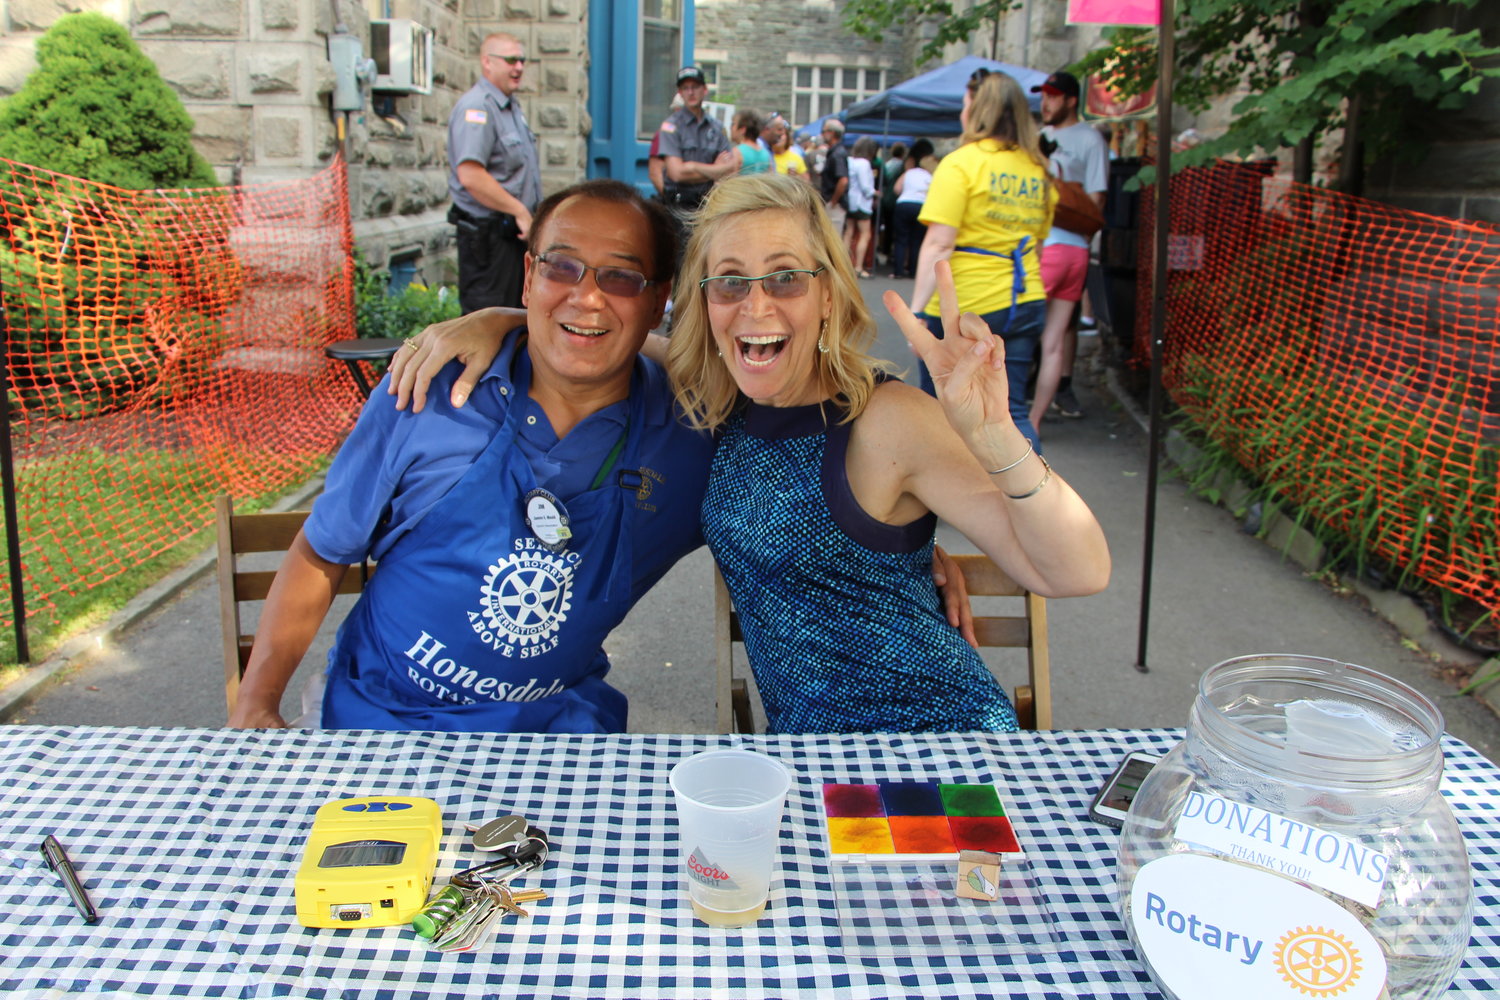 Honesdale Rotarians Jim Mould and Karen Mander welcomed guests to the Rotary’s Beer Garden in 2018. All are welcome again this year.